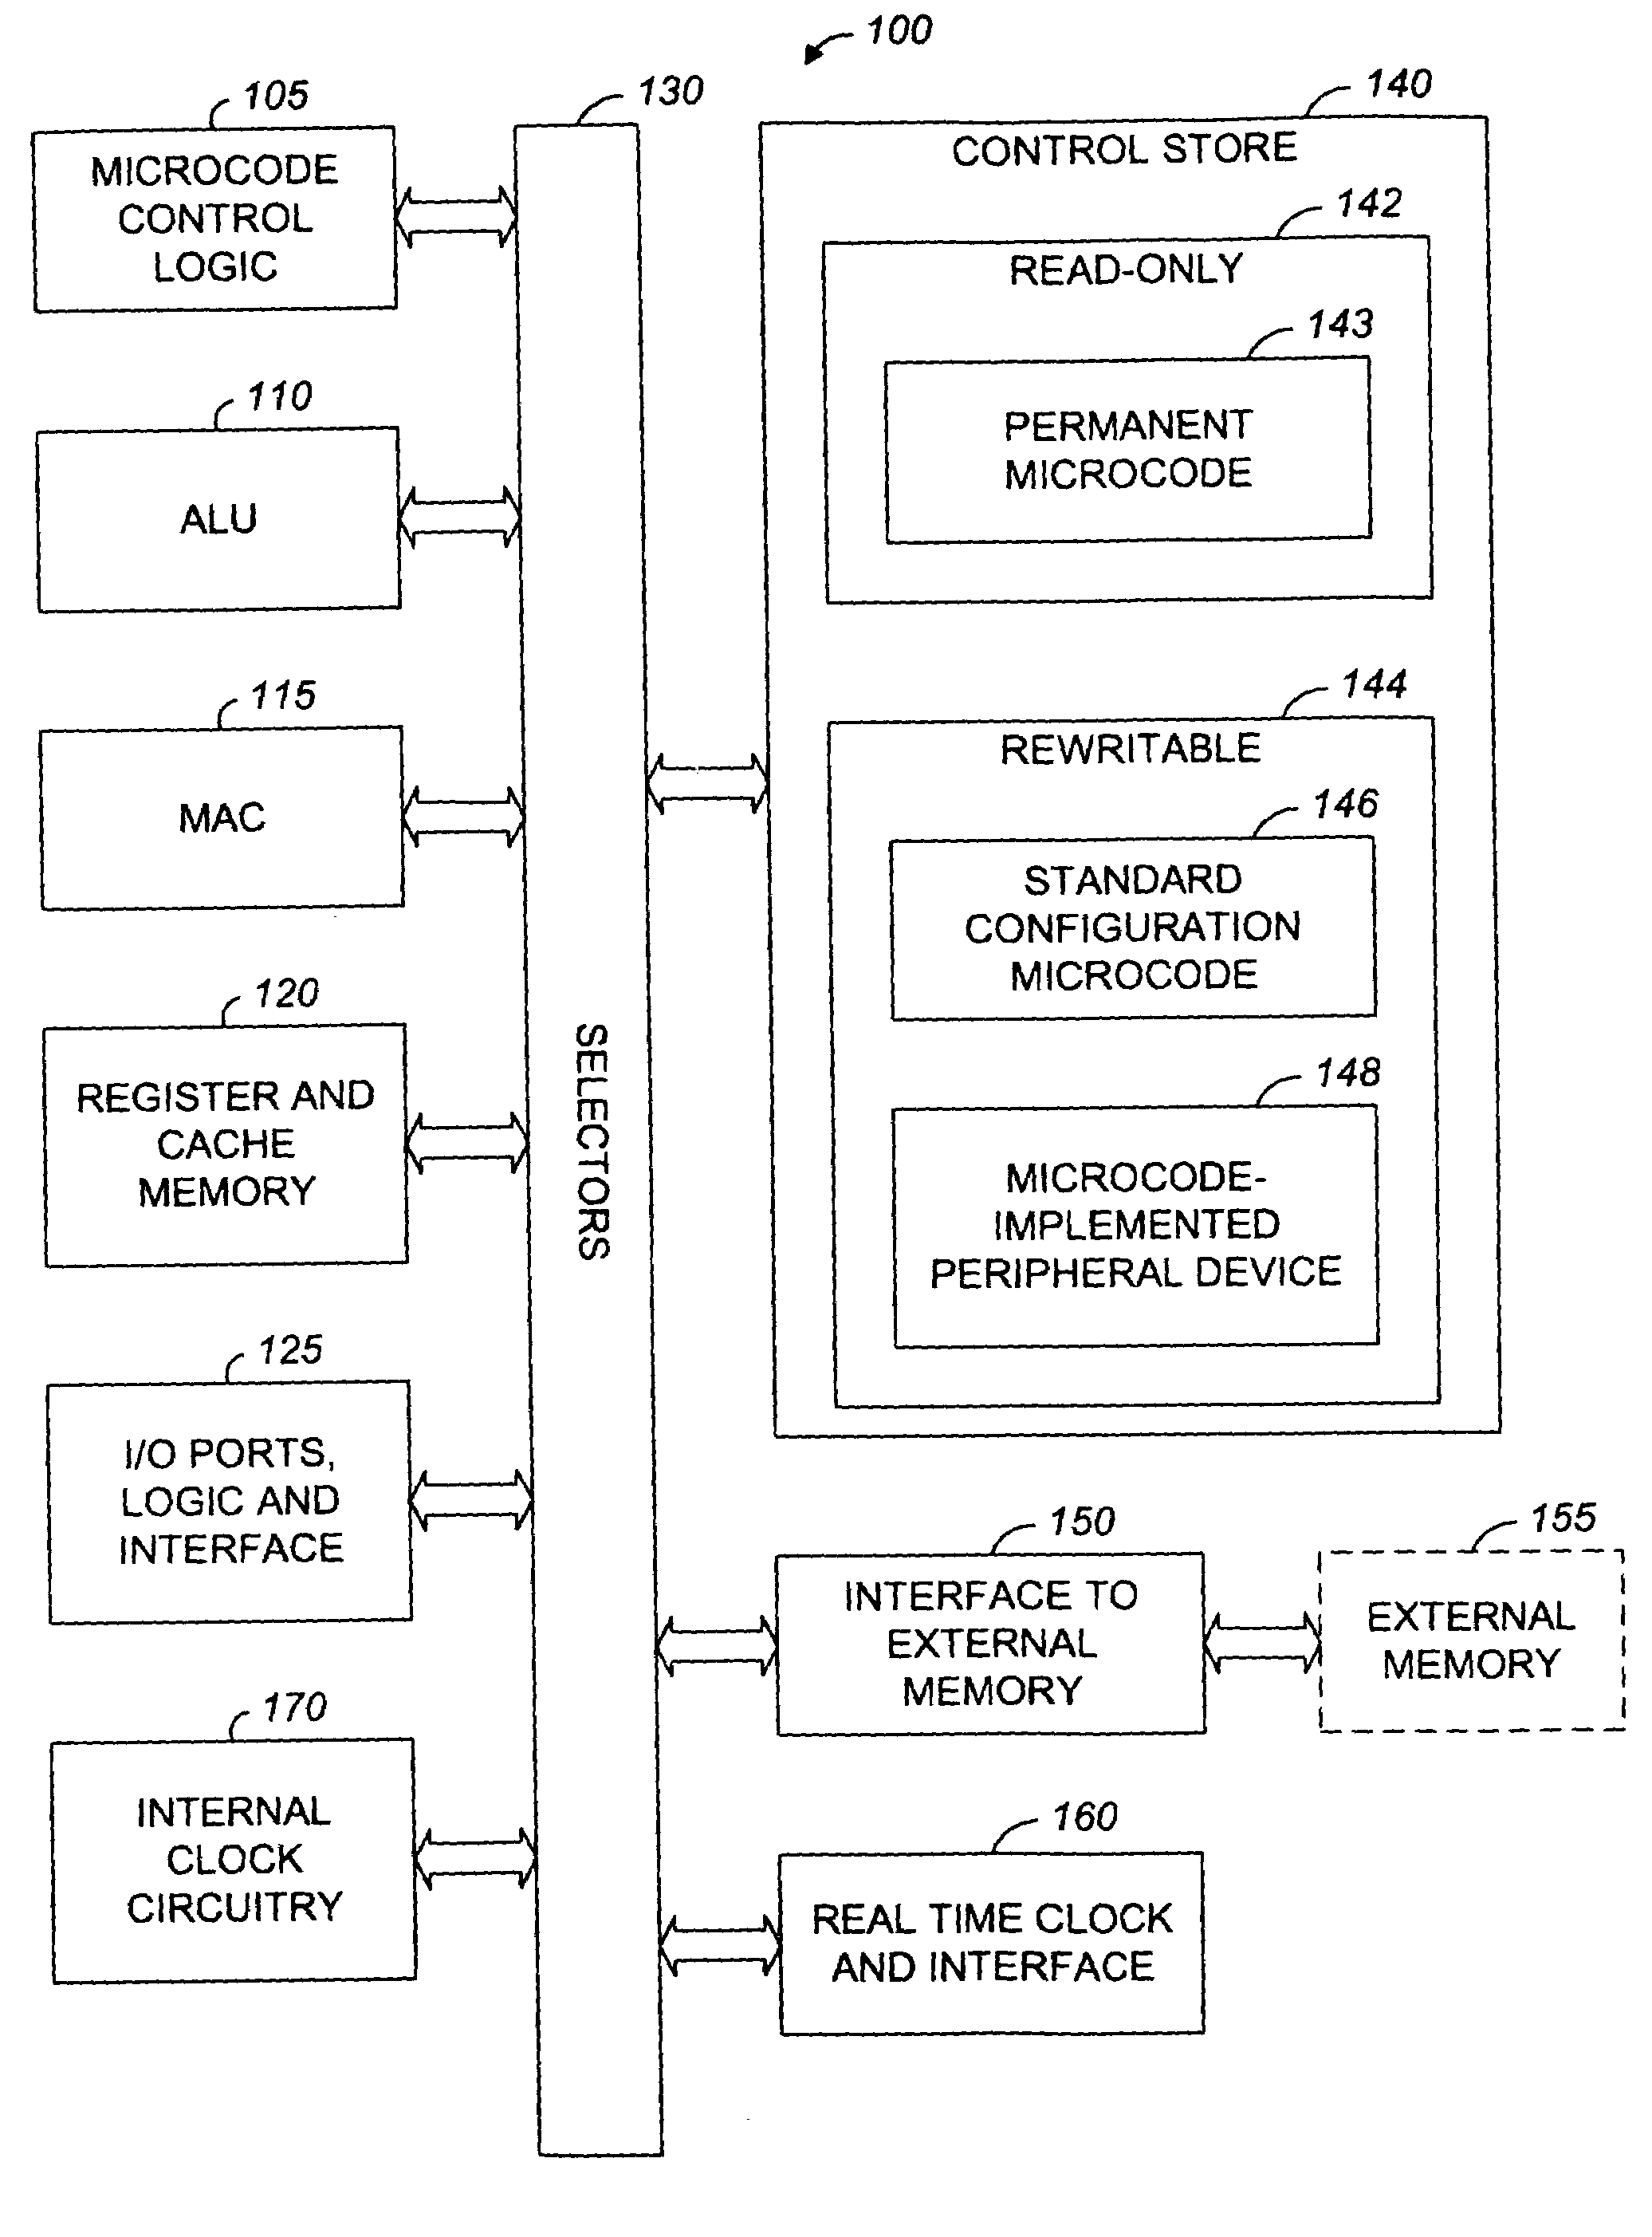 Microcontroller architecture supporting microcode-implemented peripheral devices